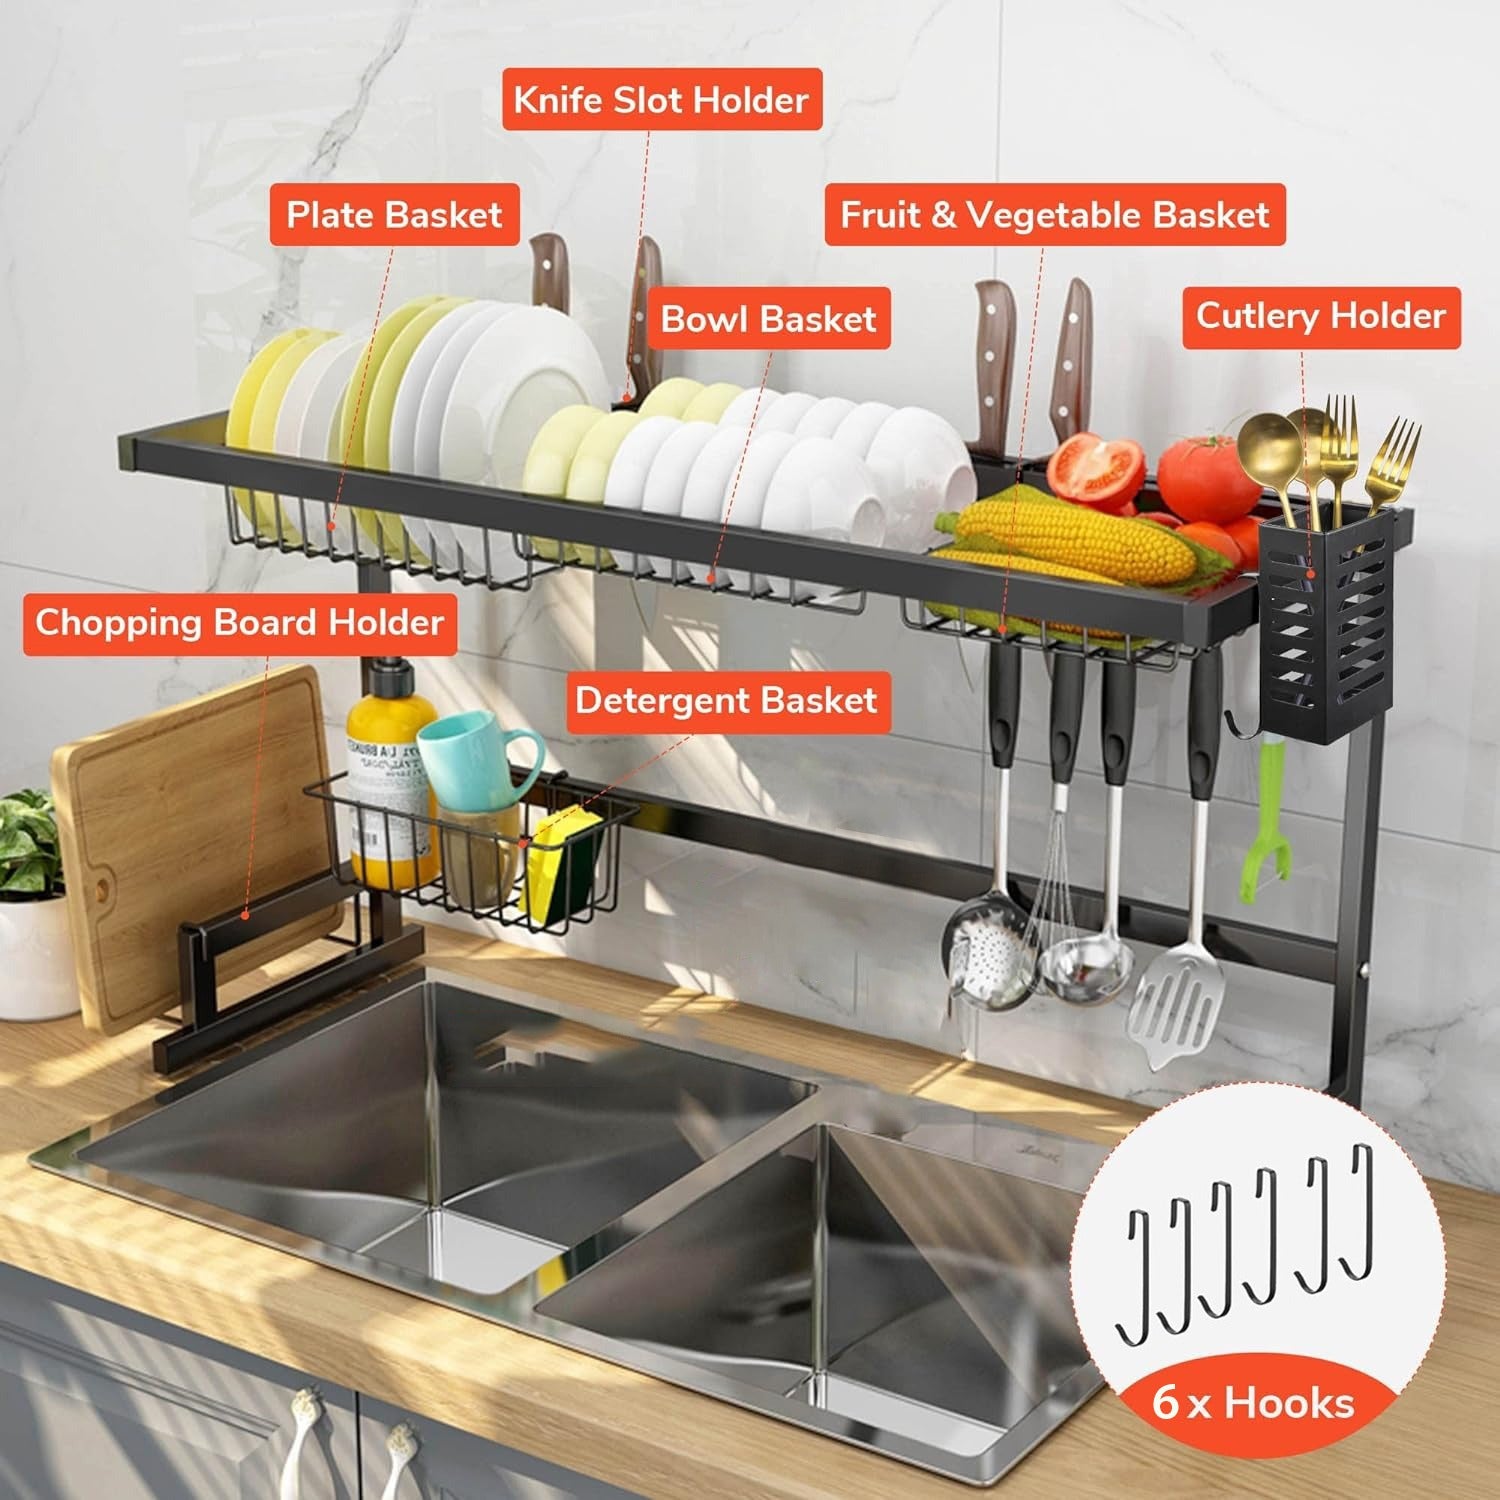 Over the Sink Dish Drying Rack perfect organizer for kitchen